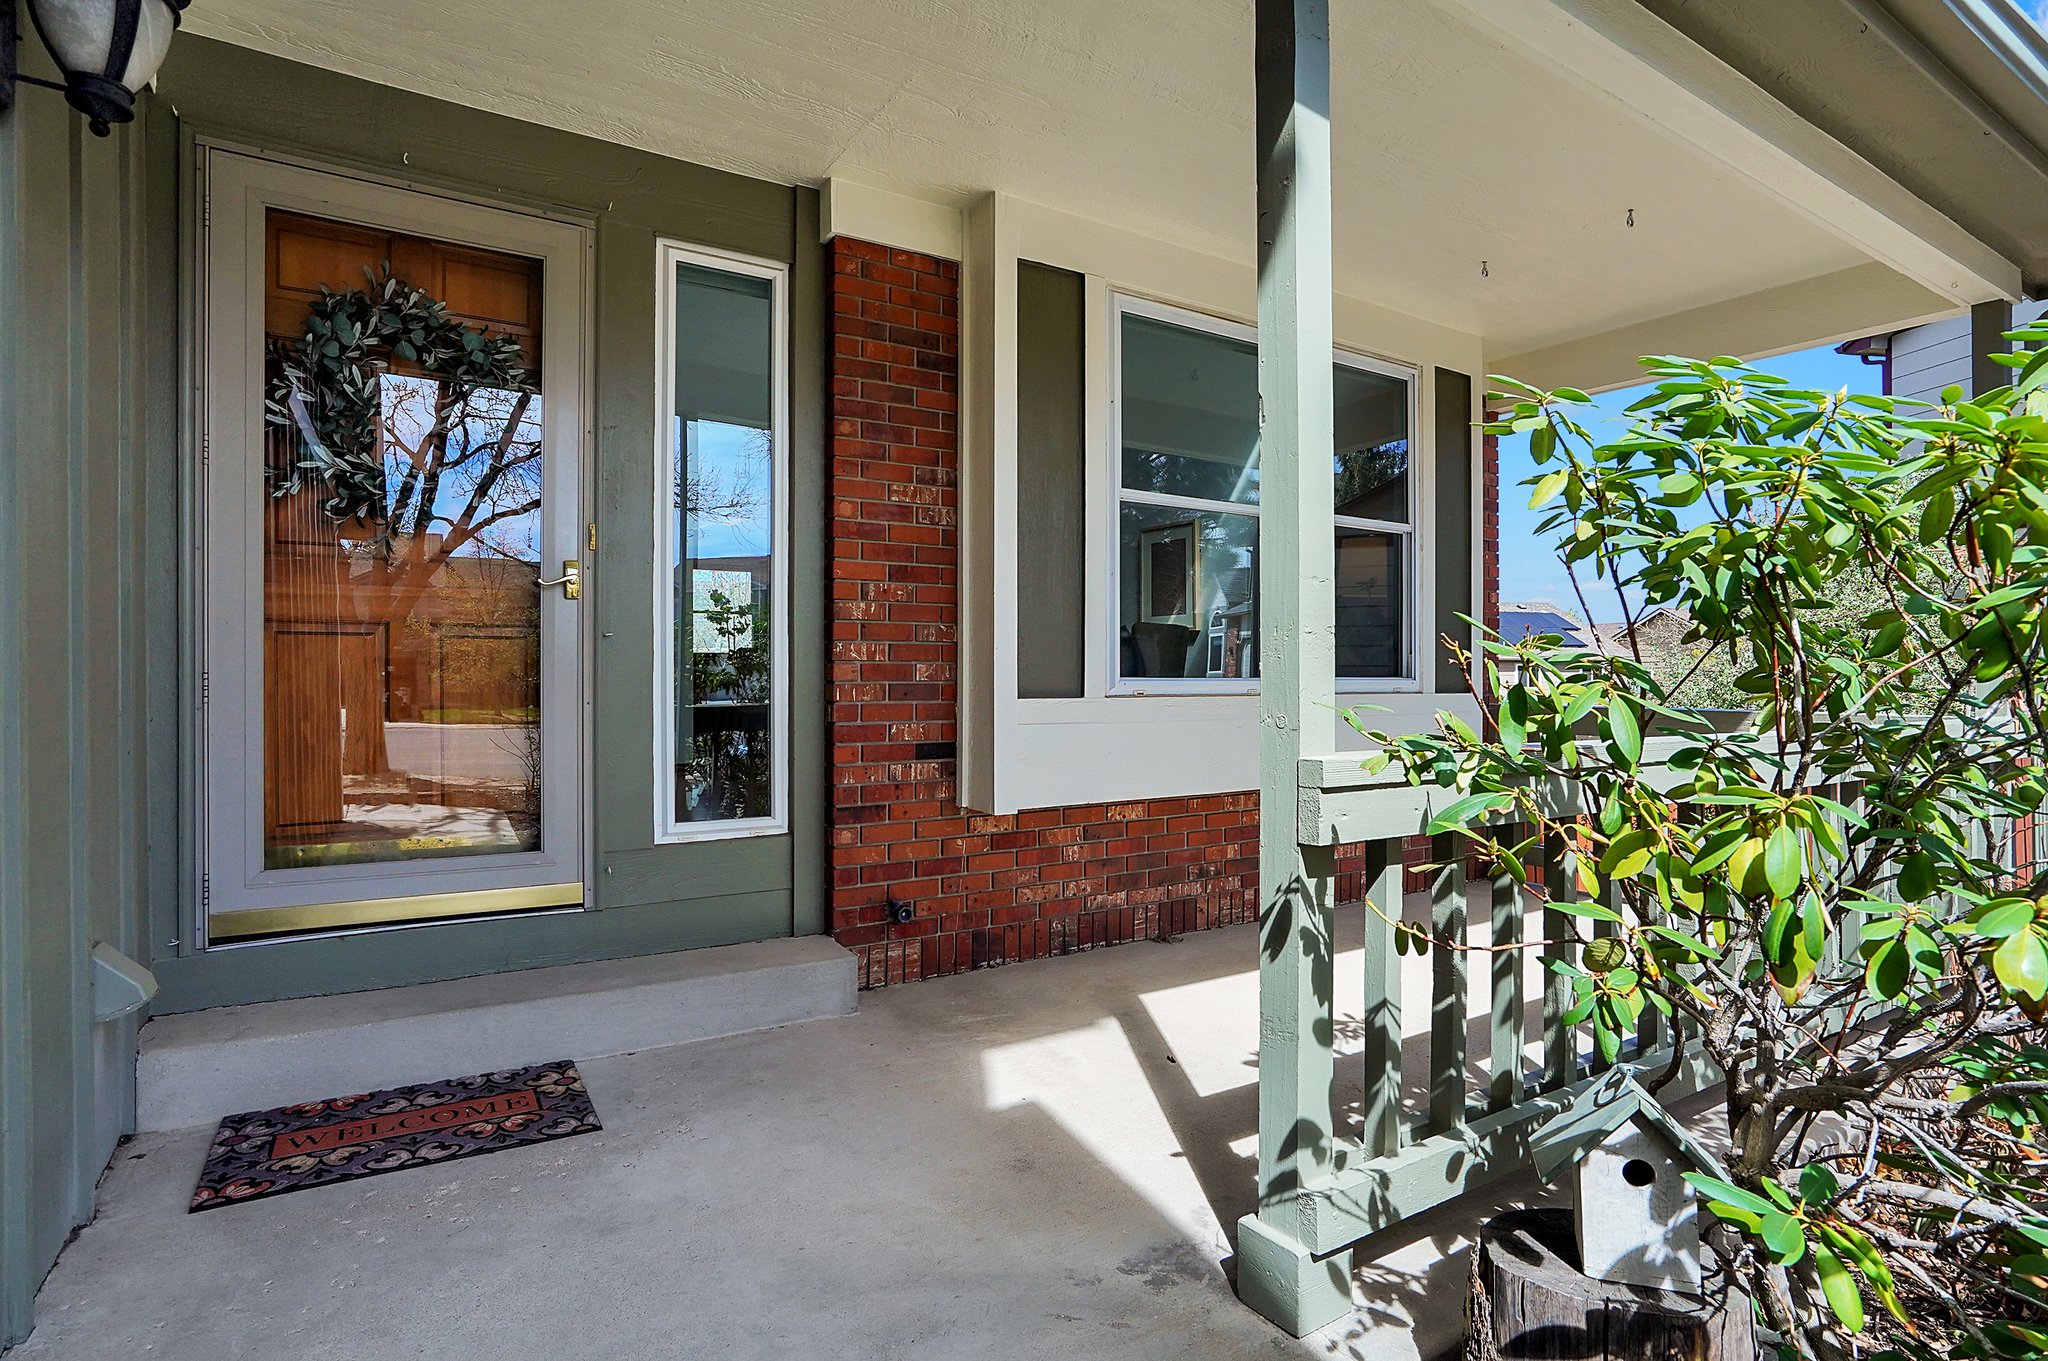 Spacious Covered Front Porch Overlooking Cul-De-Sac